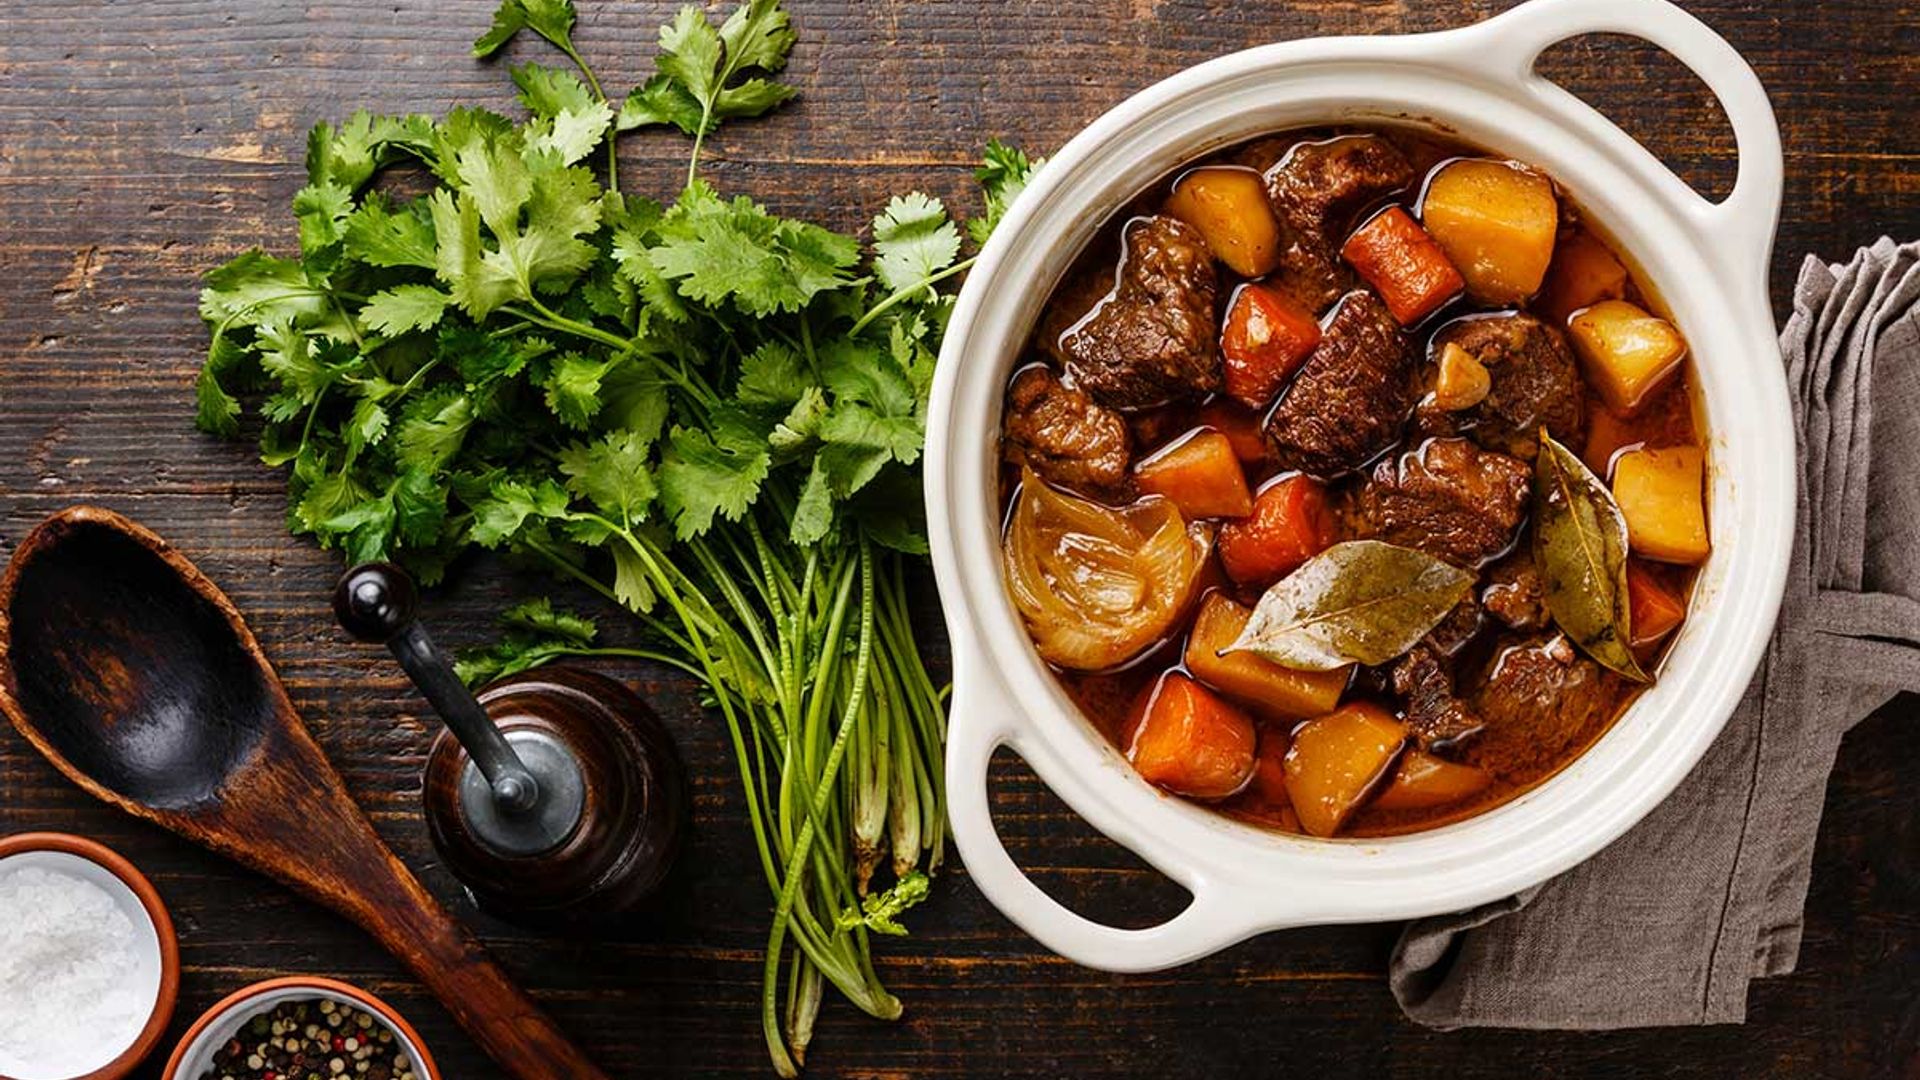 Raymond Blanc's boeuf bourguignon recipe is the winter warmer you have been looking for